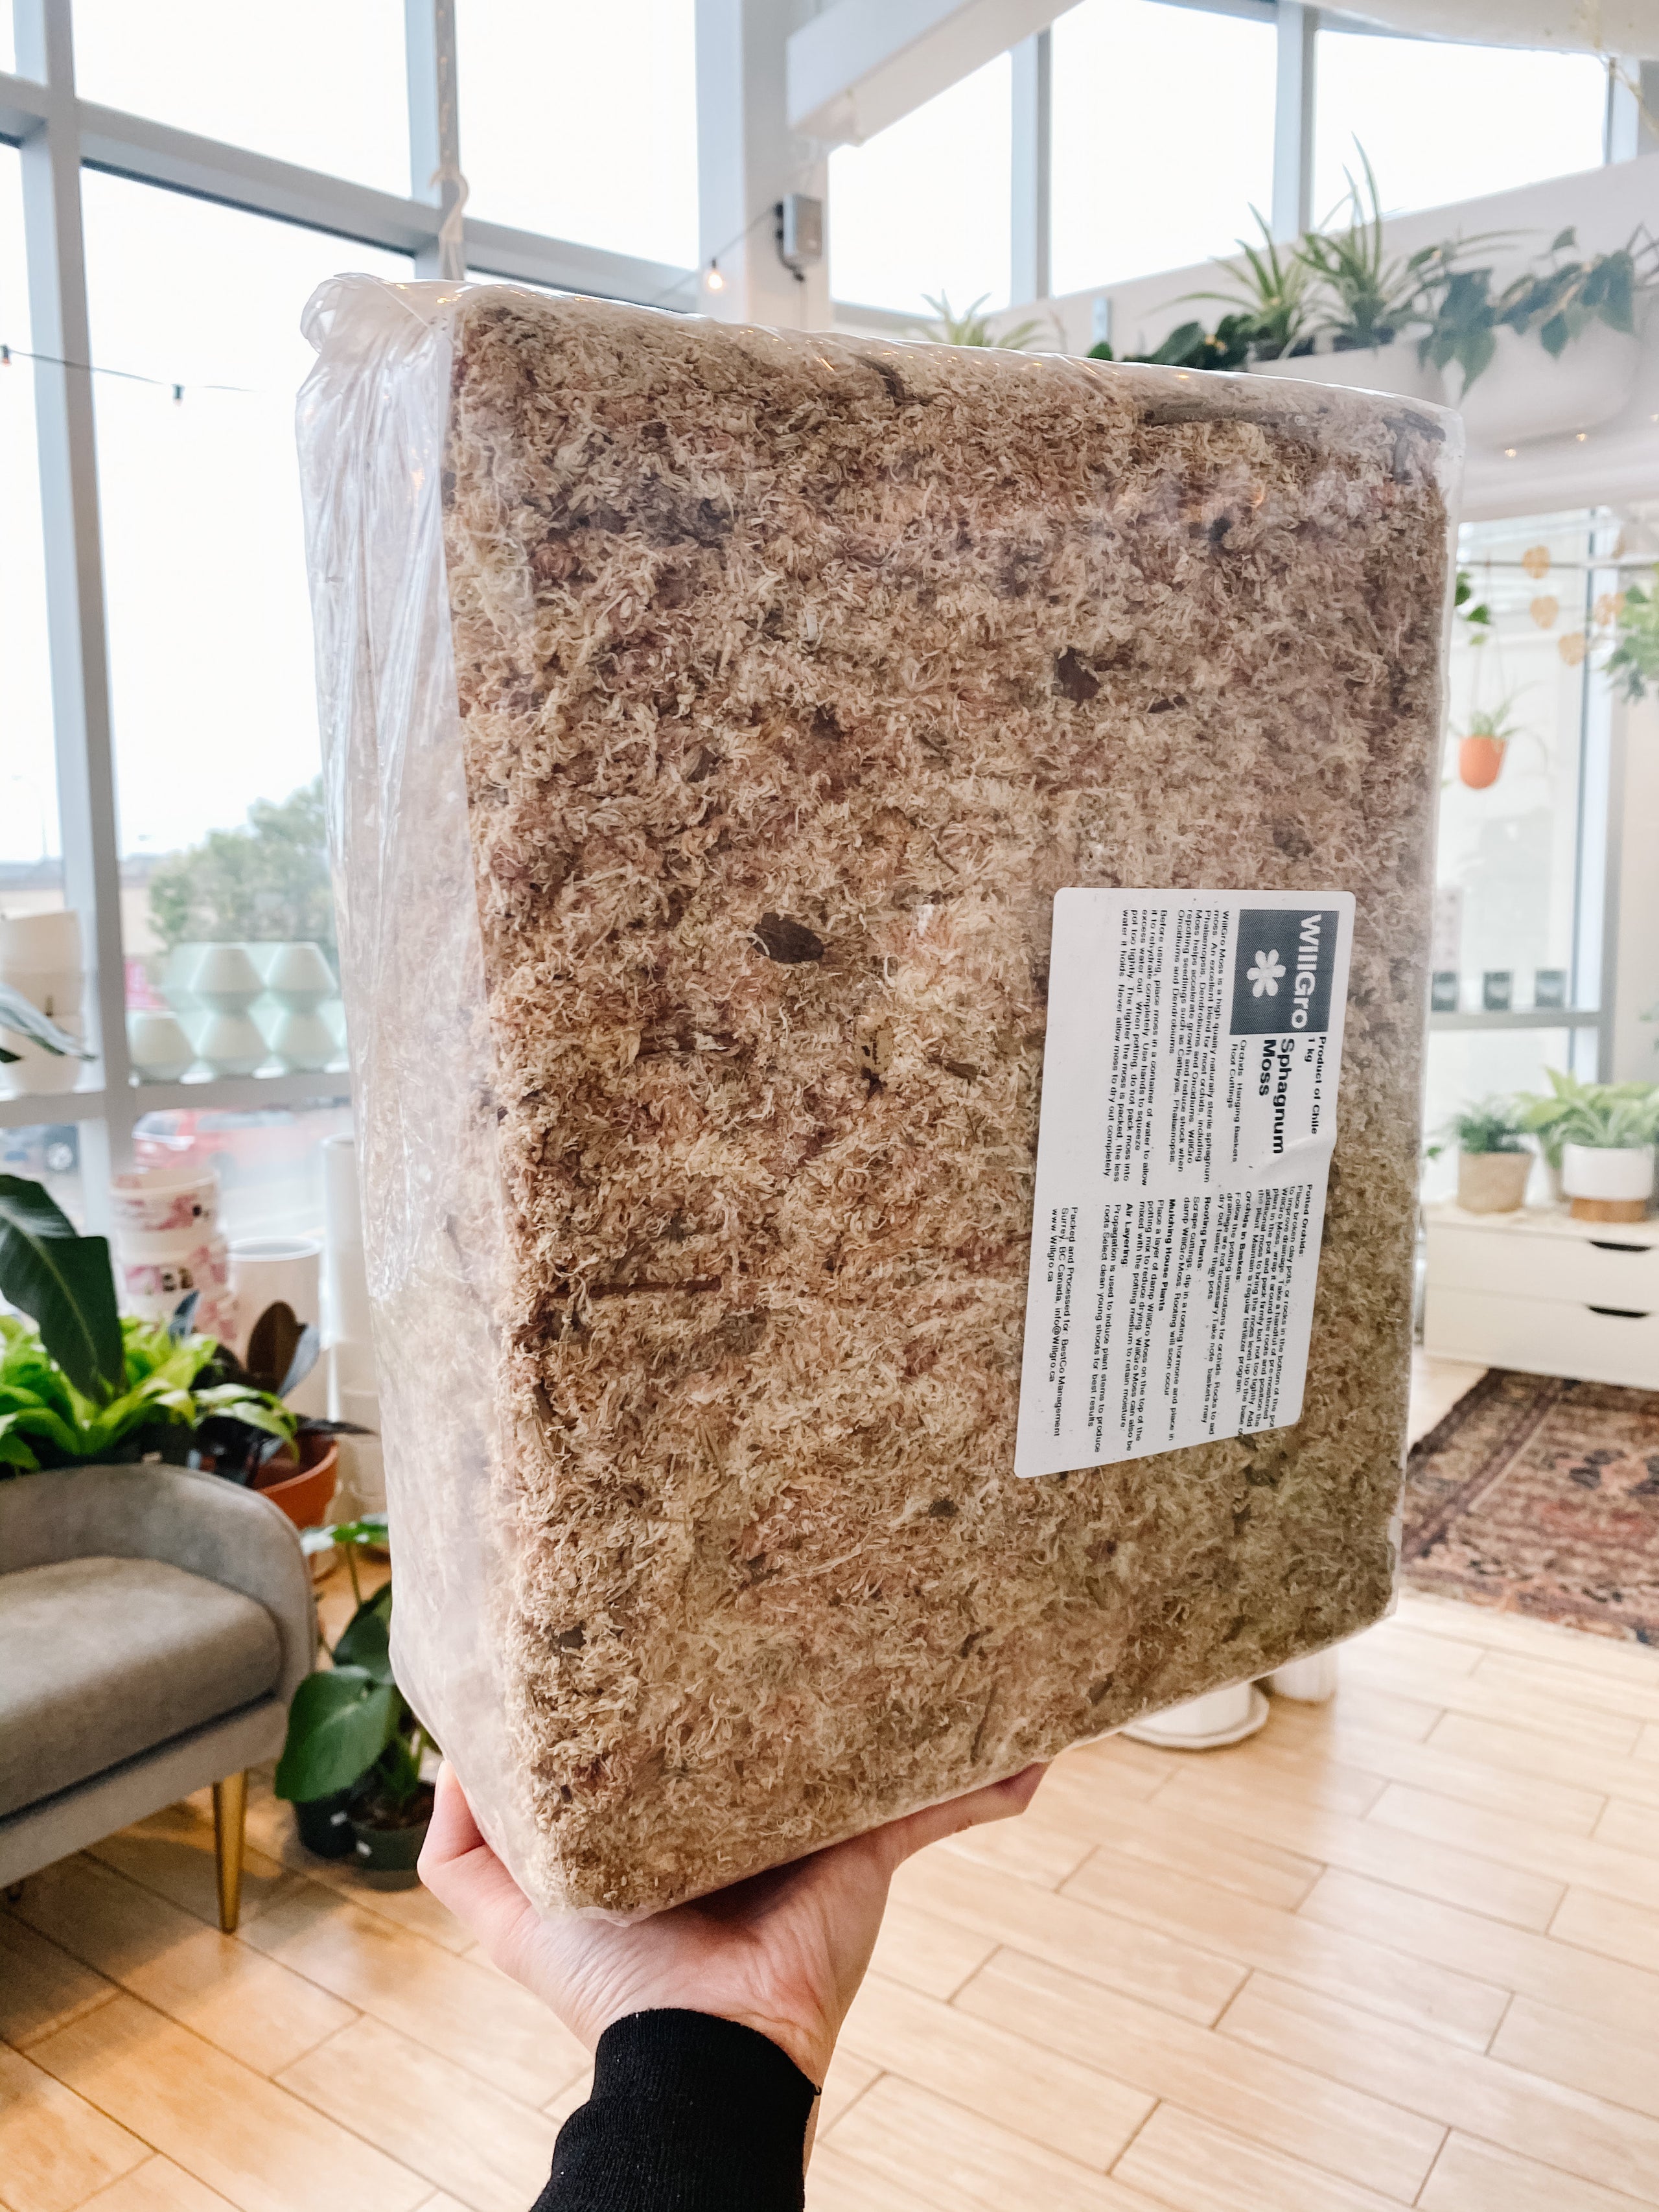 Buy Sphagnum Moss for sale | 20% Retail